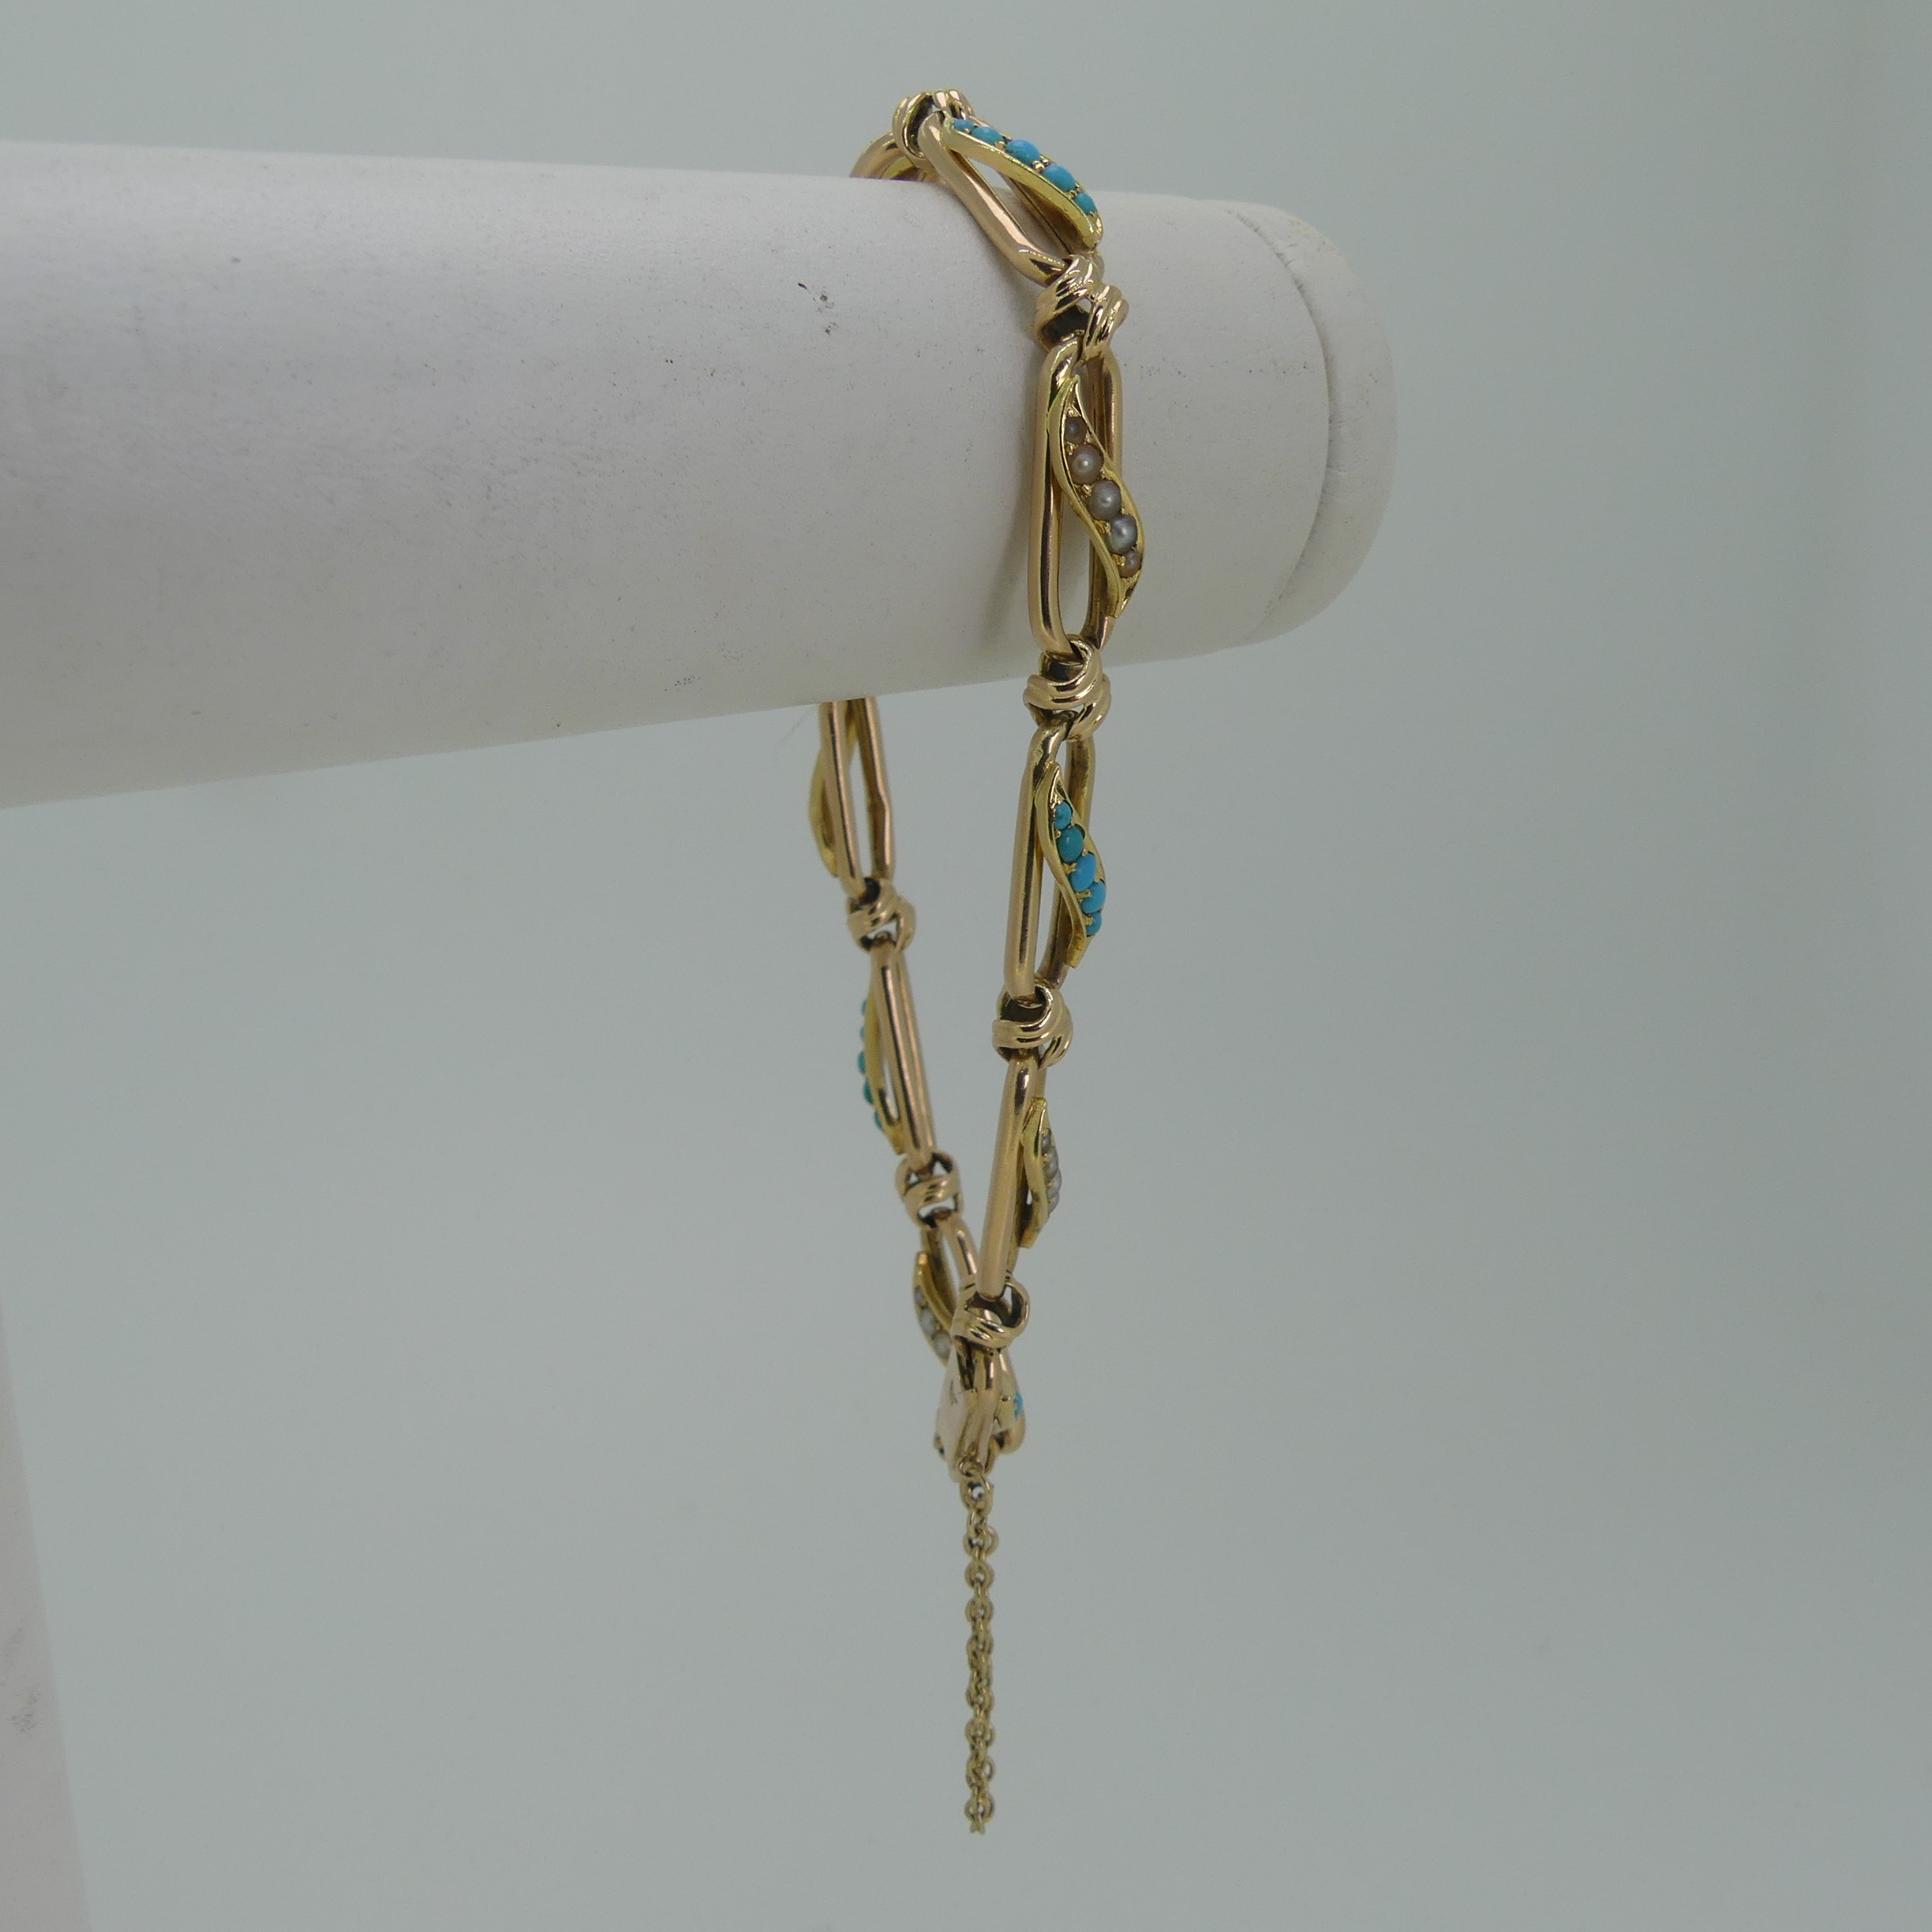 A 15ct yellow gold, seed pearl and turquoise Bracelet, the open oval links with alternate centres of - Image 3 of 3